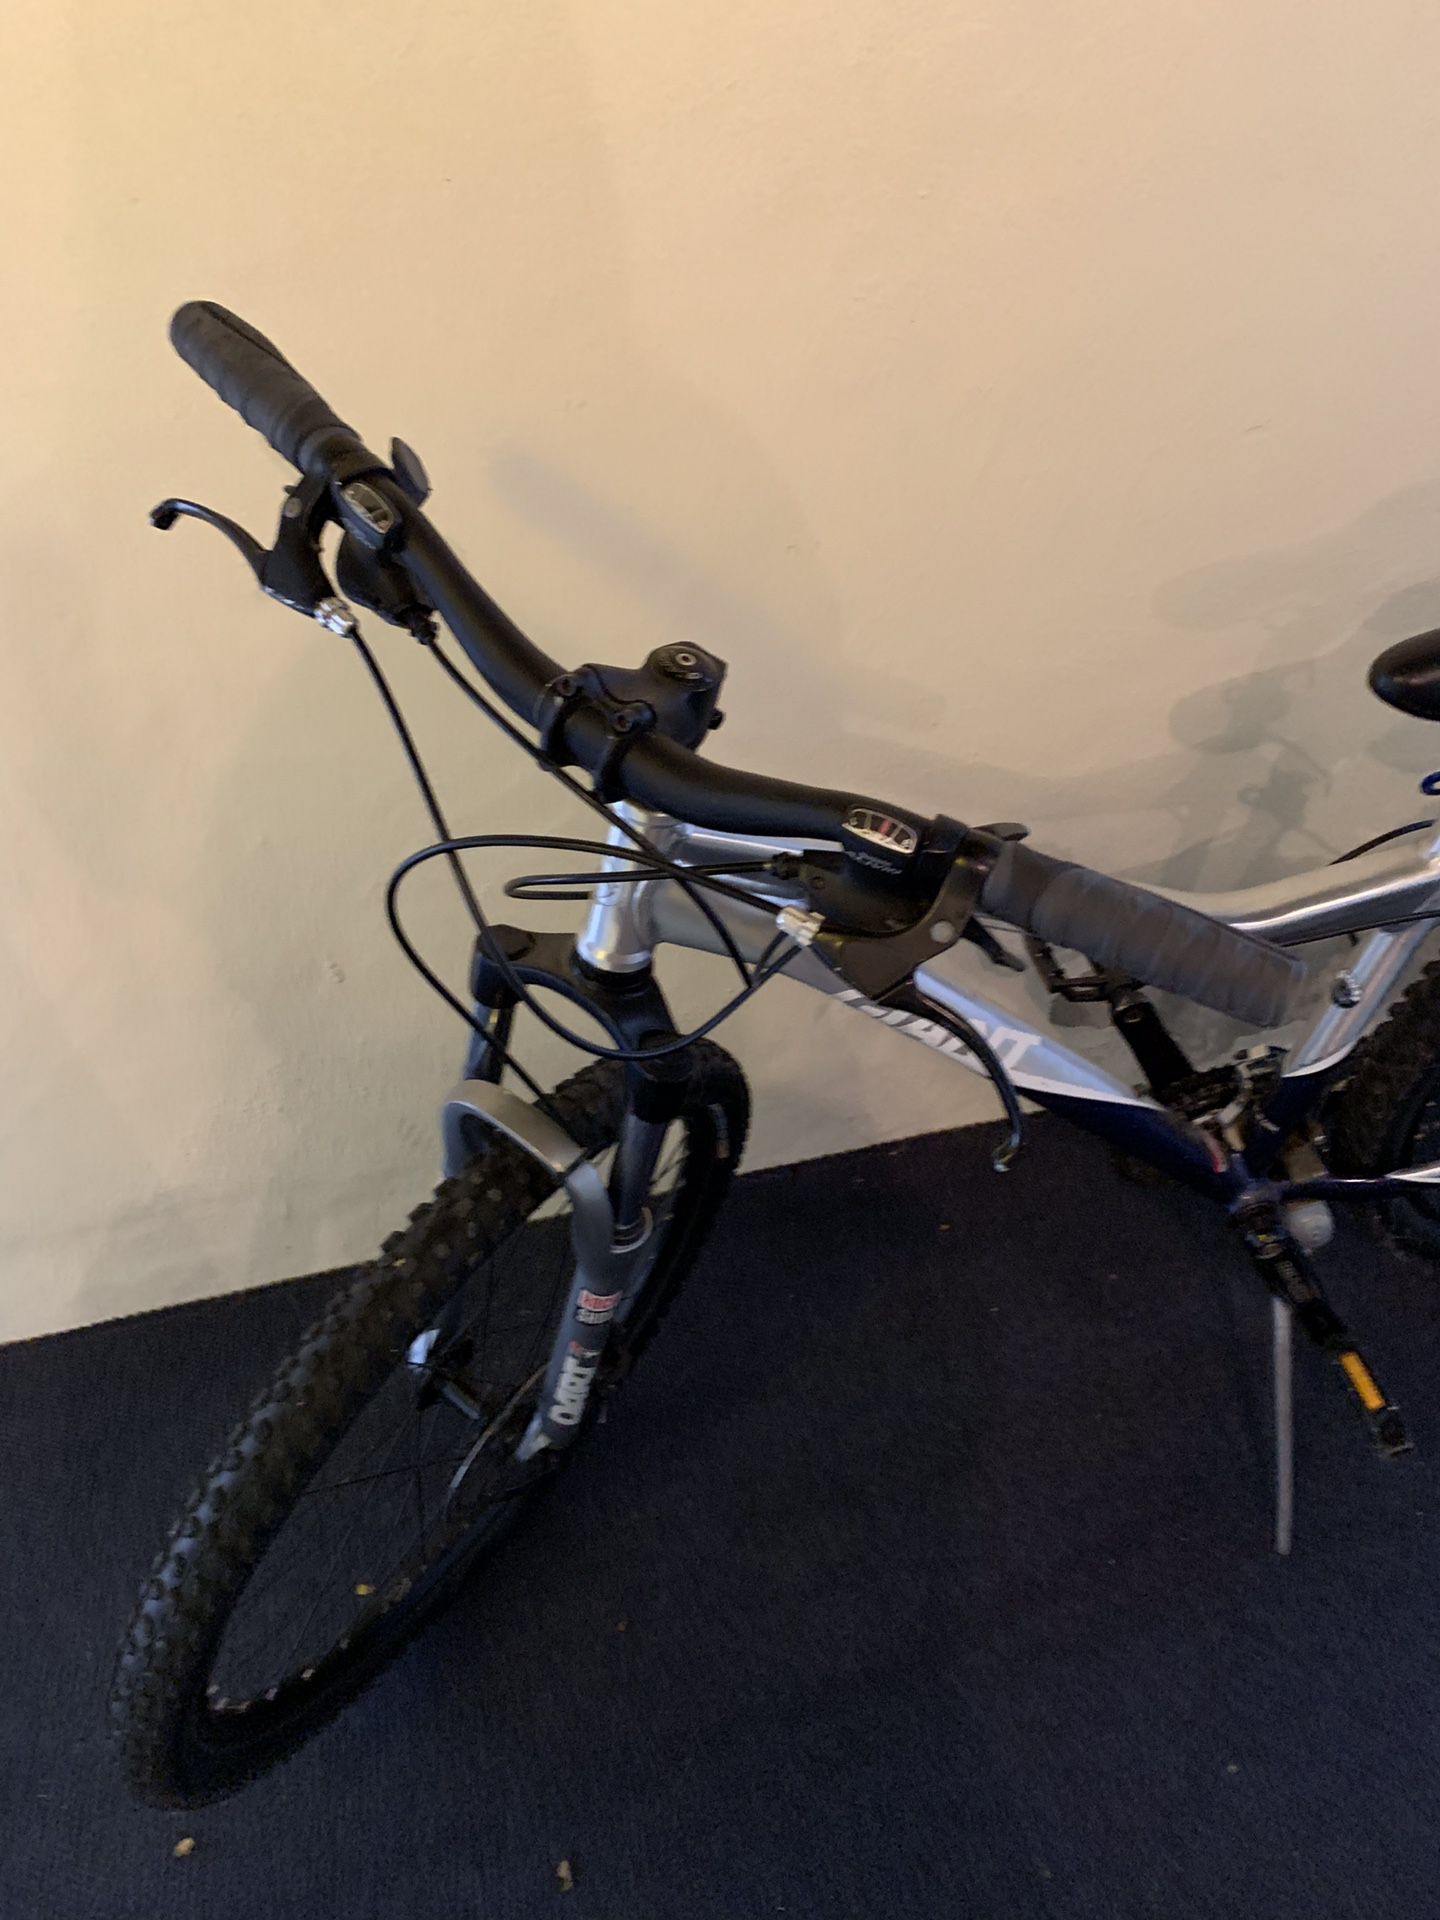 Giant bike excellent condition front tire needs air.. 200 or bo